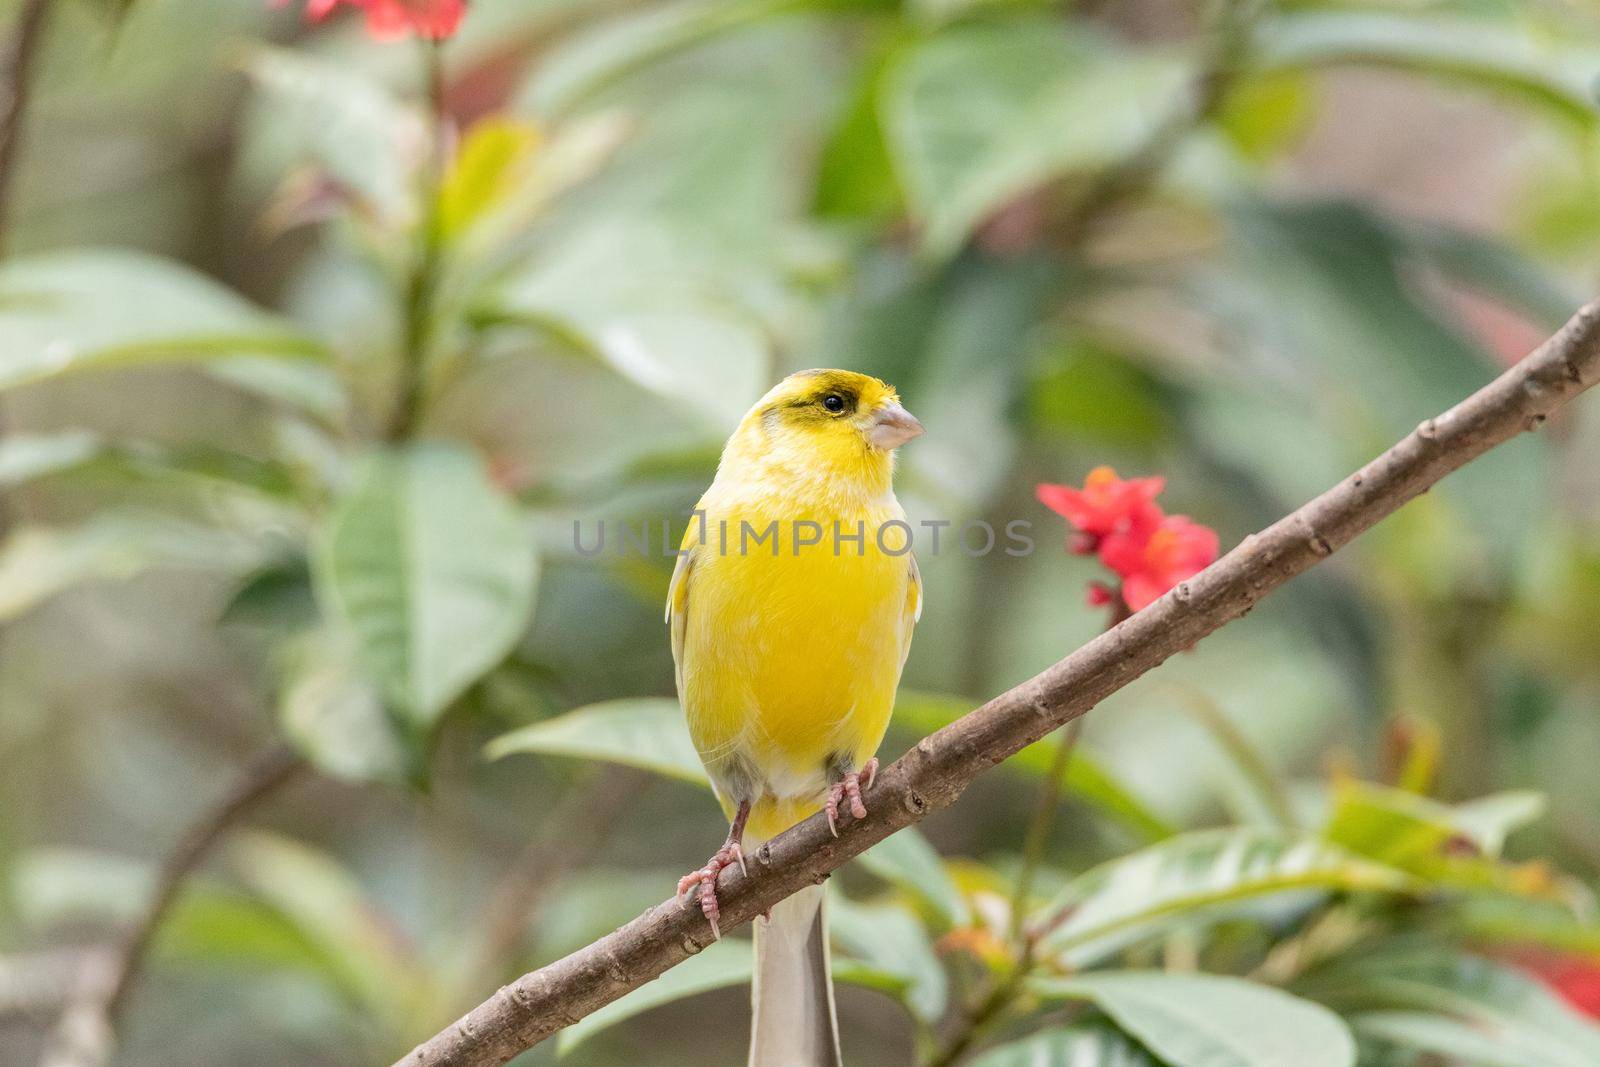 Bright yellow male Atlantic Canary bird Serinus canaria is found on the Canary Islands.